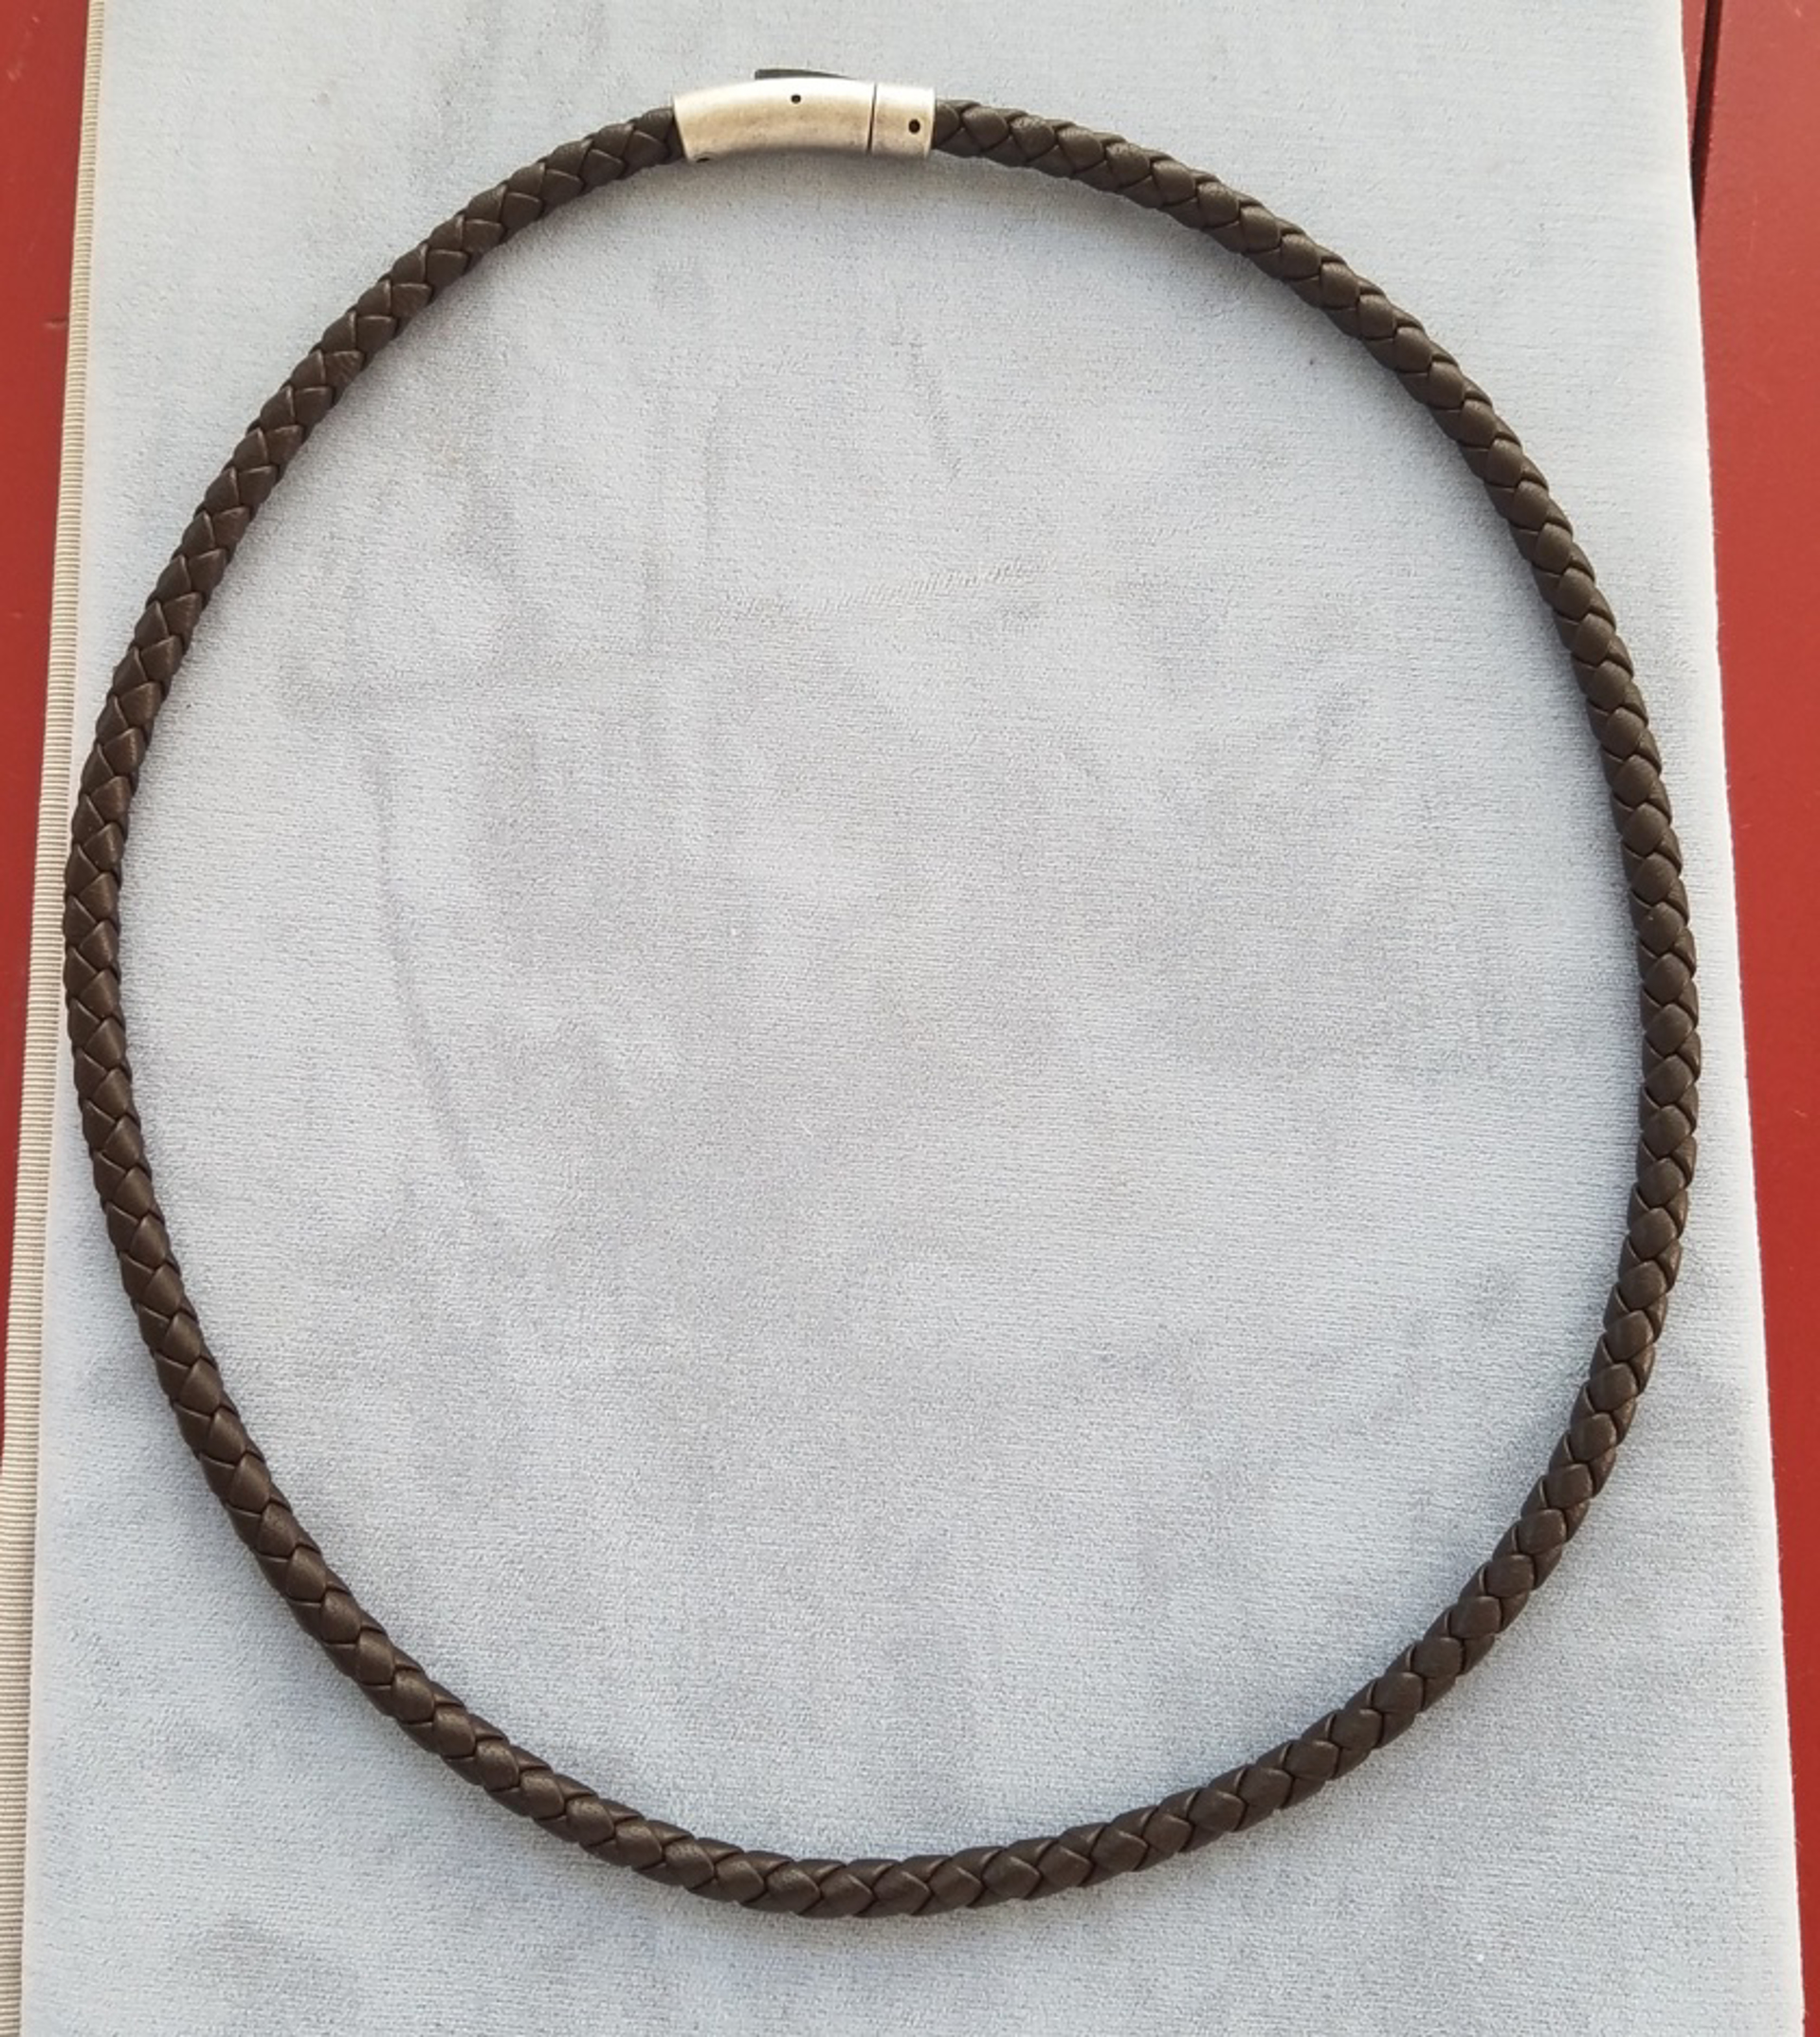 Necklace - Braided Lamb's Leather with Brushed Nickel Clasp  #2529 by Doris King